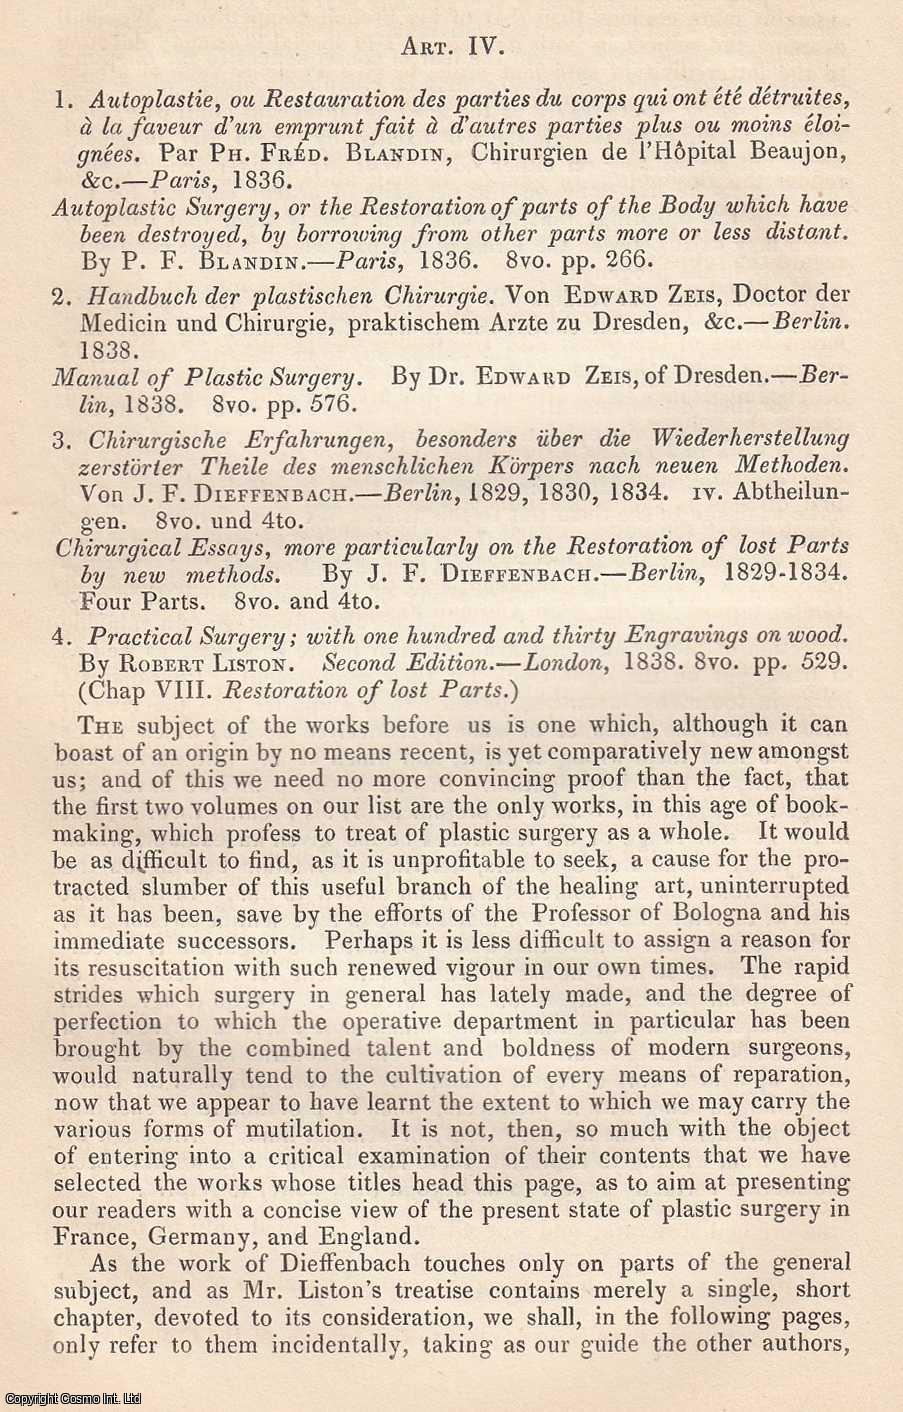 Edited by Sir John Forbes & John Conolly - Plastic Surgery, by Zeis, Blandin, Dieffenbach, Liston. An original essay from the British & Foreign Medical Review, 1839. No author is given for this article.